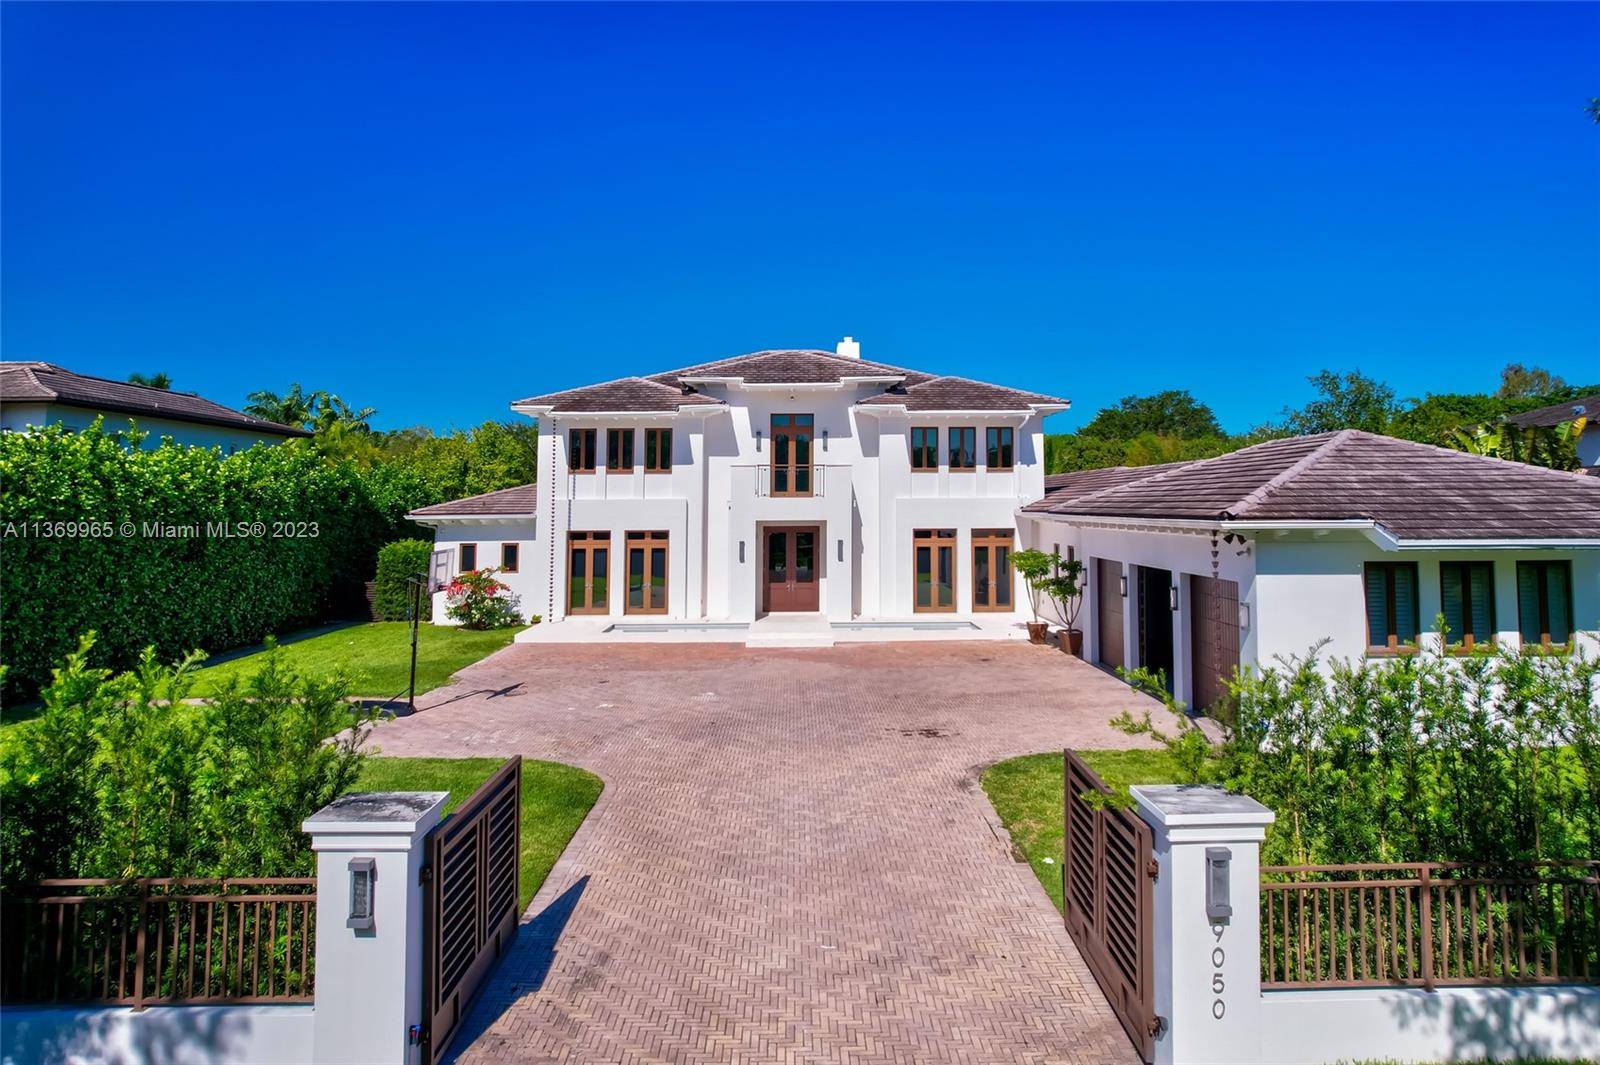 Located in exclusive beautiful Stritter Estates of Pinecrest, this gated smart home features a 2 story dramatic entry foyer w views to the open floor plan pool spa area.